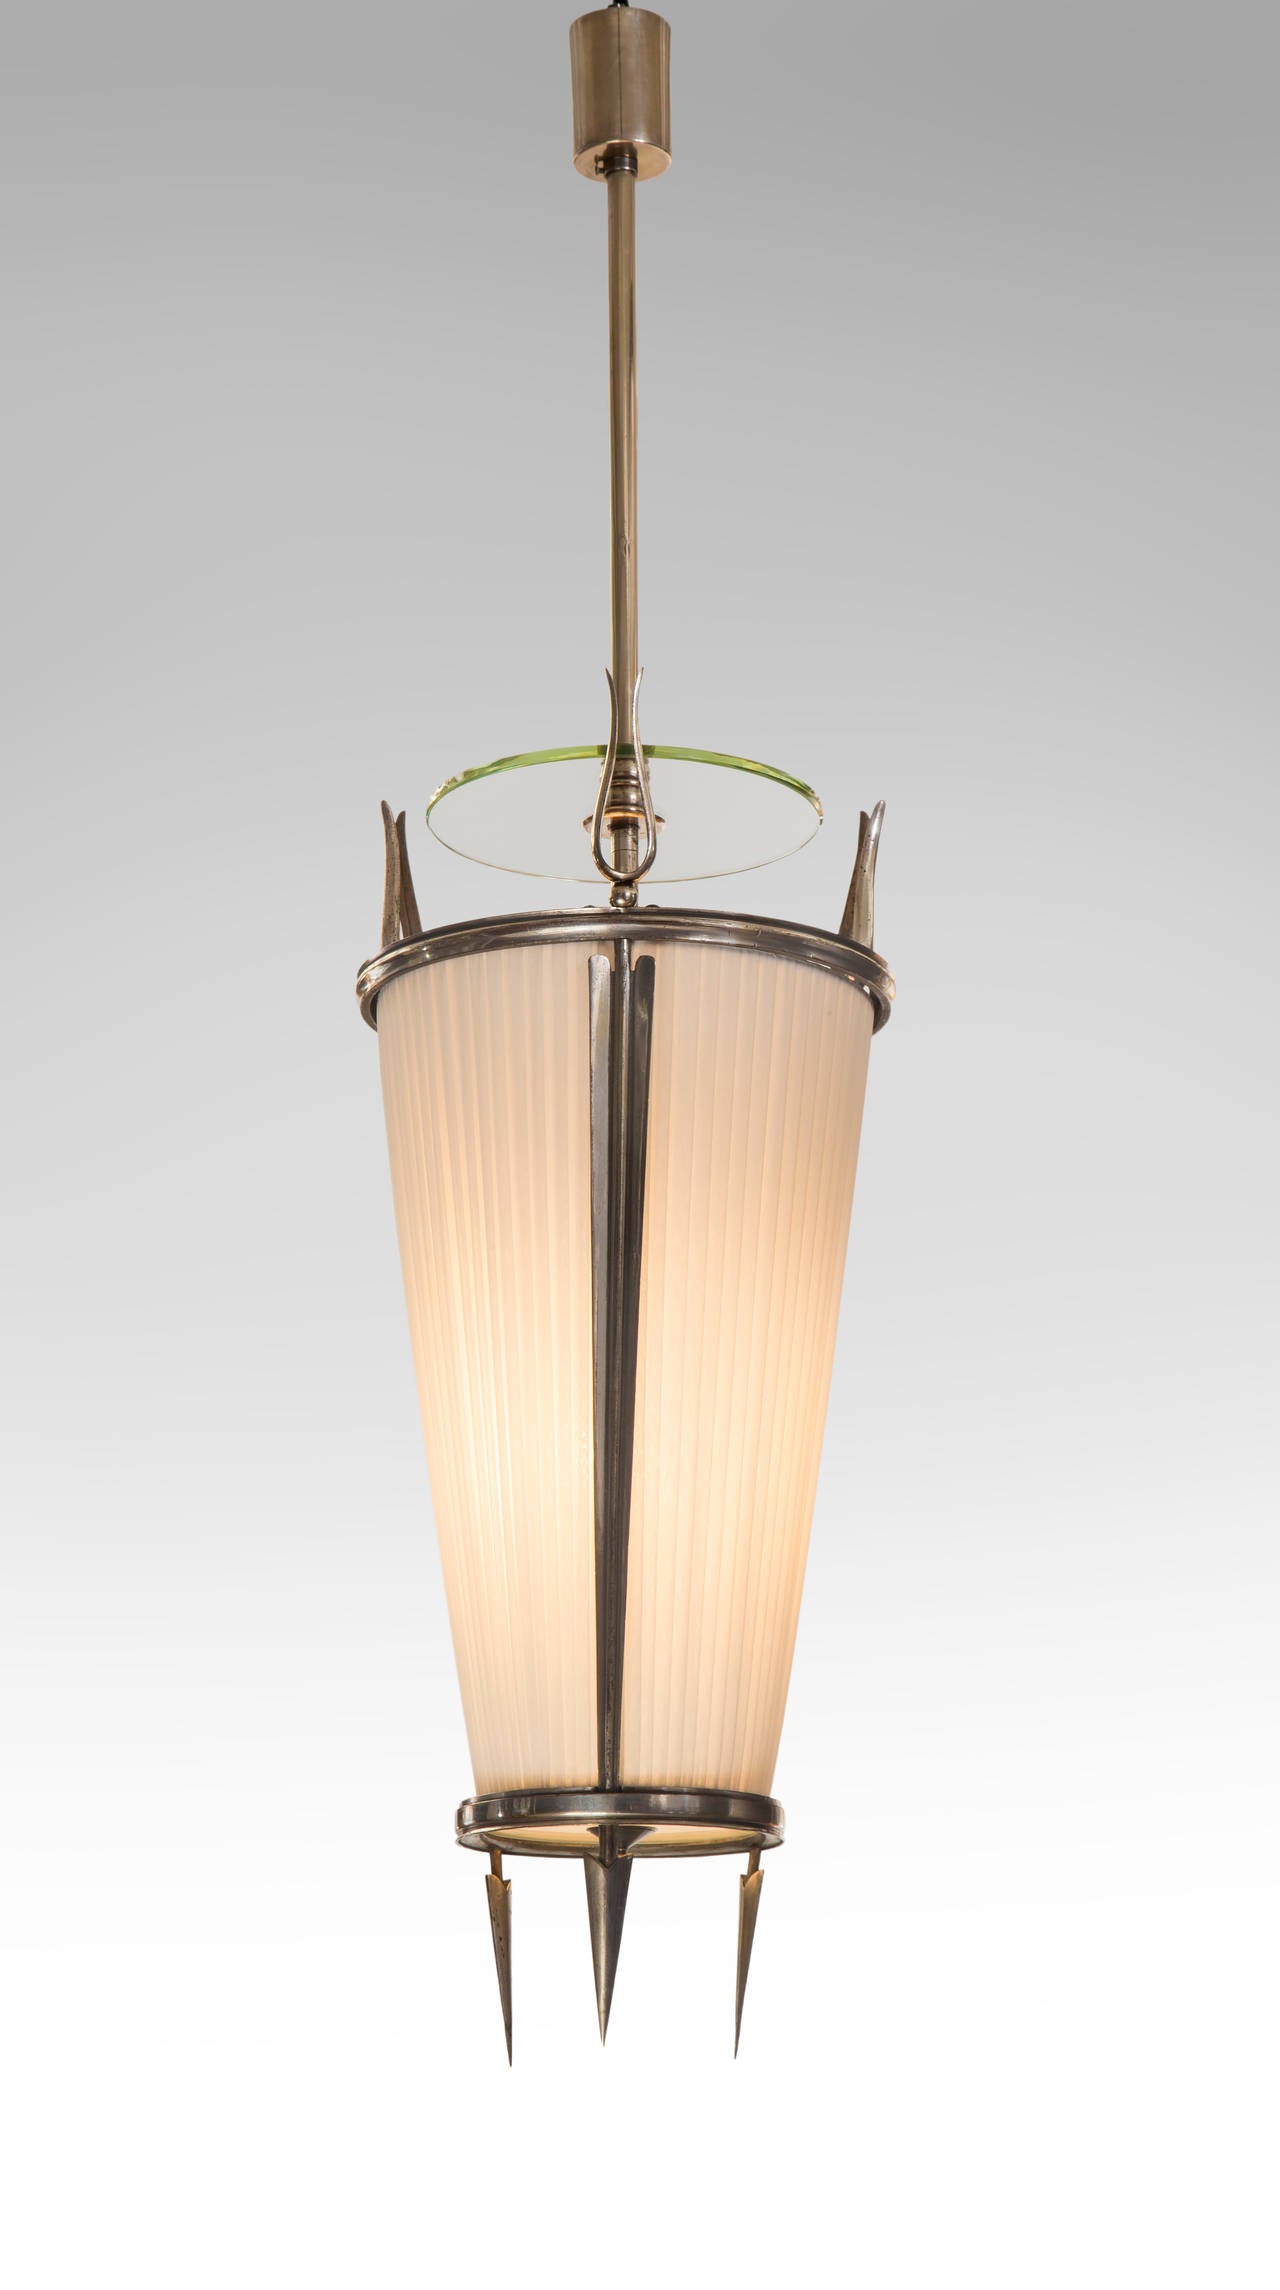 Each cylindrical canopy above a suspension rod centering a floating glass disc, the conical body with a fabric shade framed by stylized arrows.

The same model lantern is illustrated by P. Buffa and A. Cassi, Decoratori e Architetti Contemporanei,